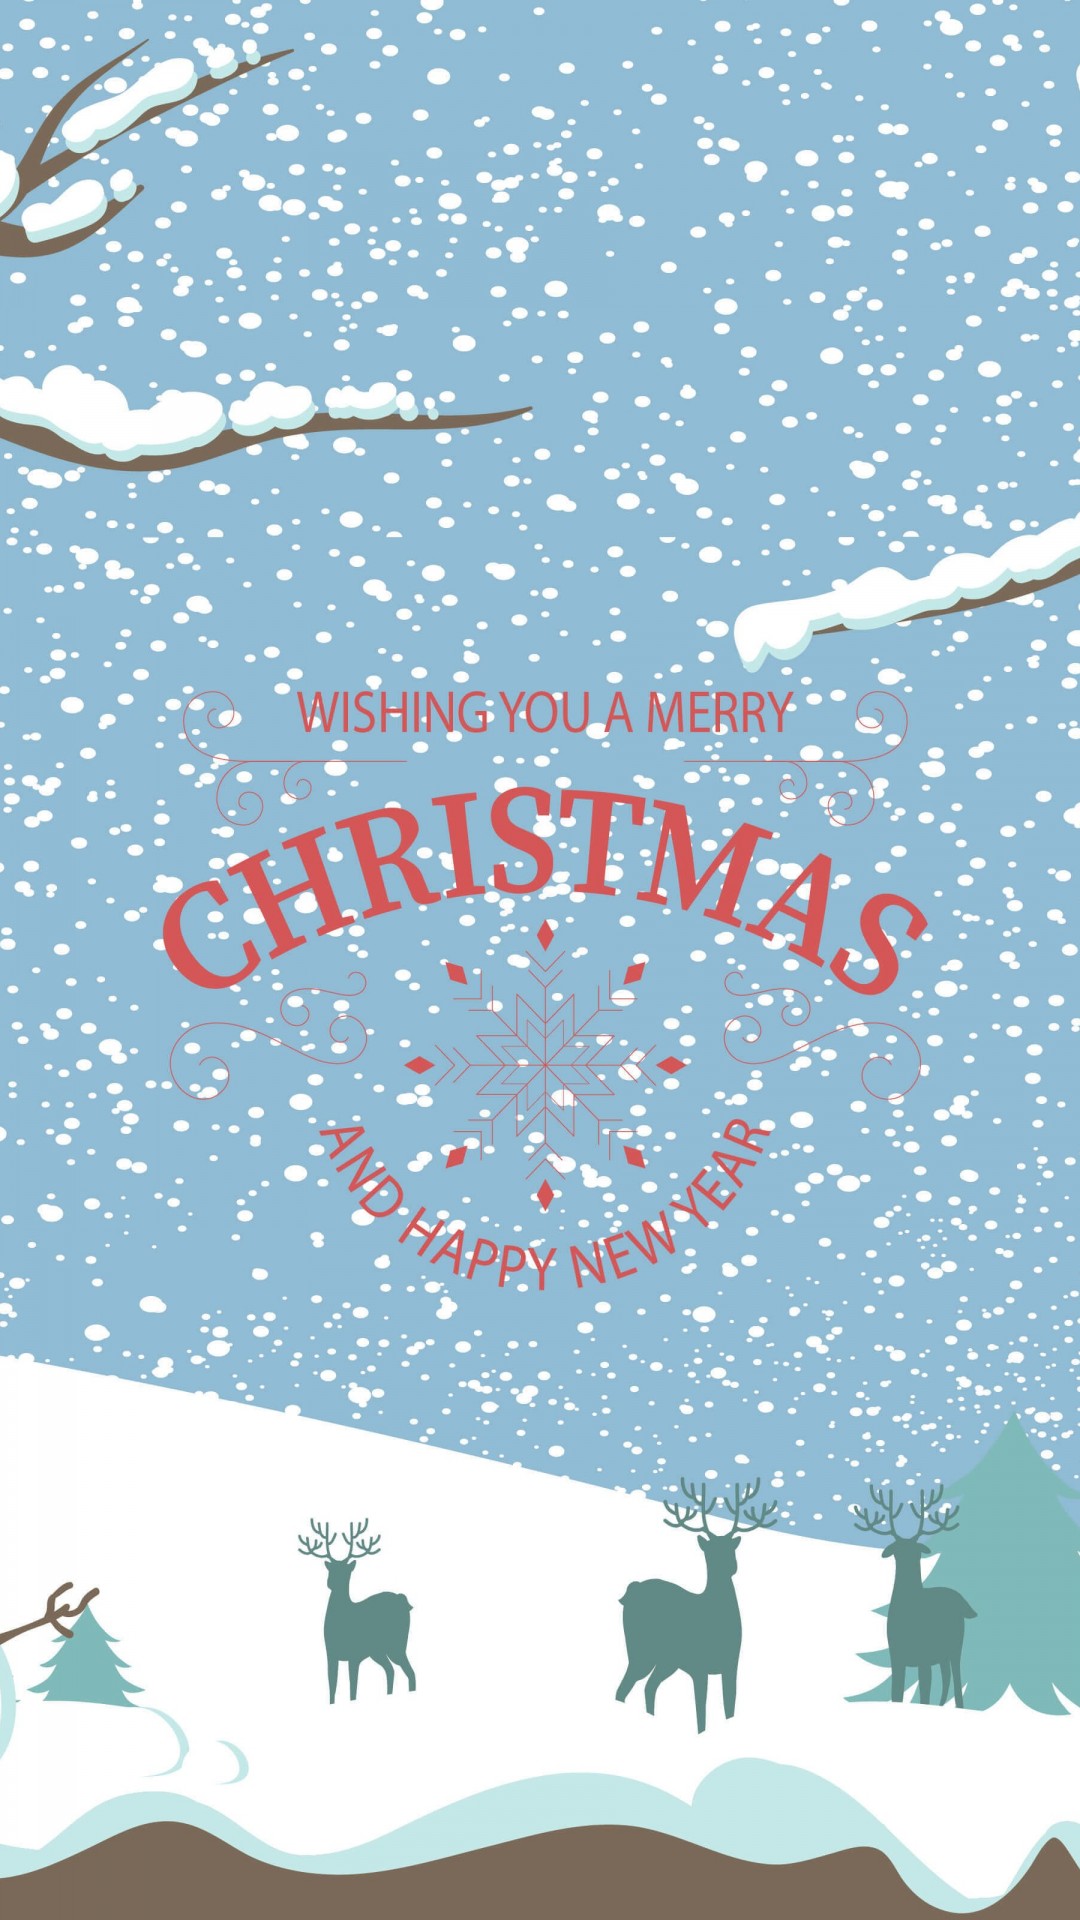 Merry Christmas Illustration Wallpaper for SONY Xperia Z2